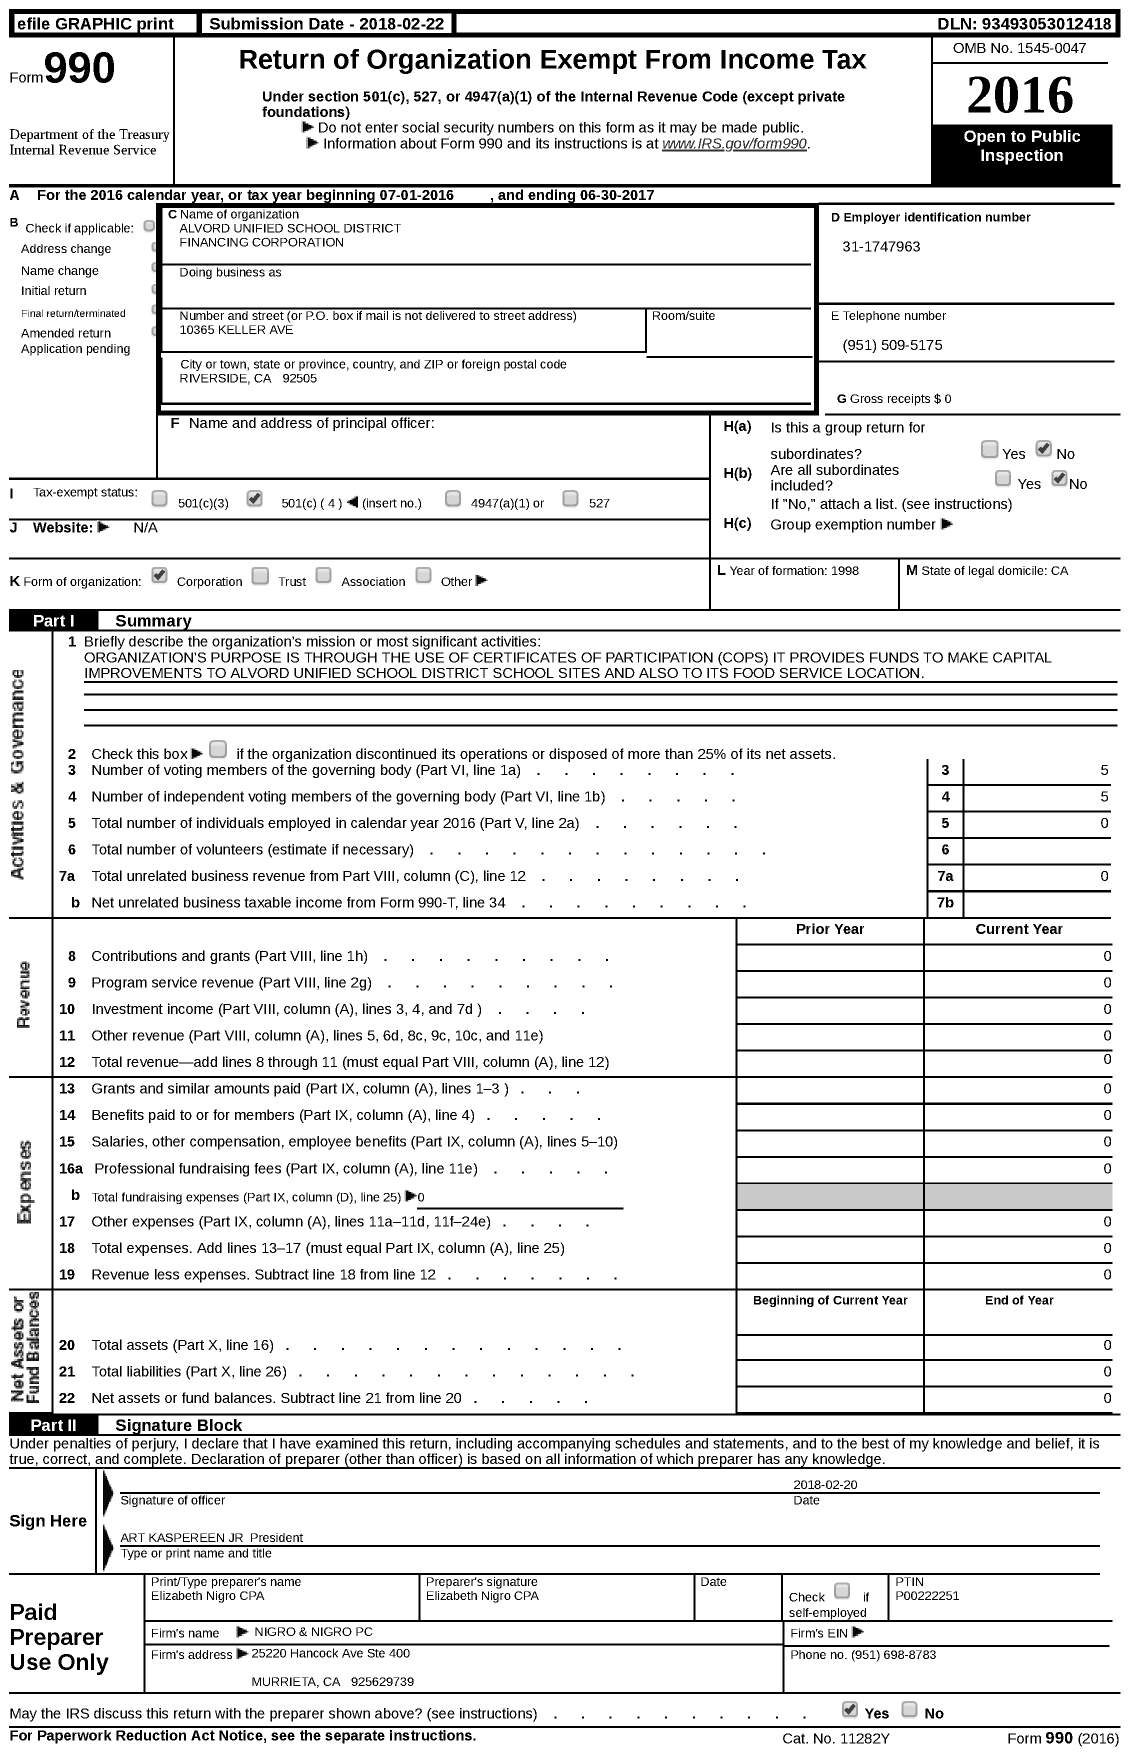 Image of first page of 2016 Form 990 for Alvord Unified School District Financing Corporation